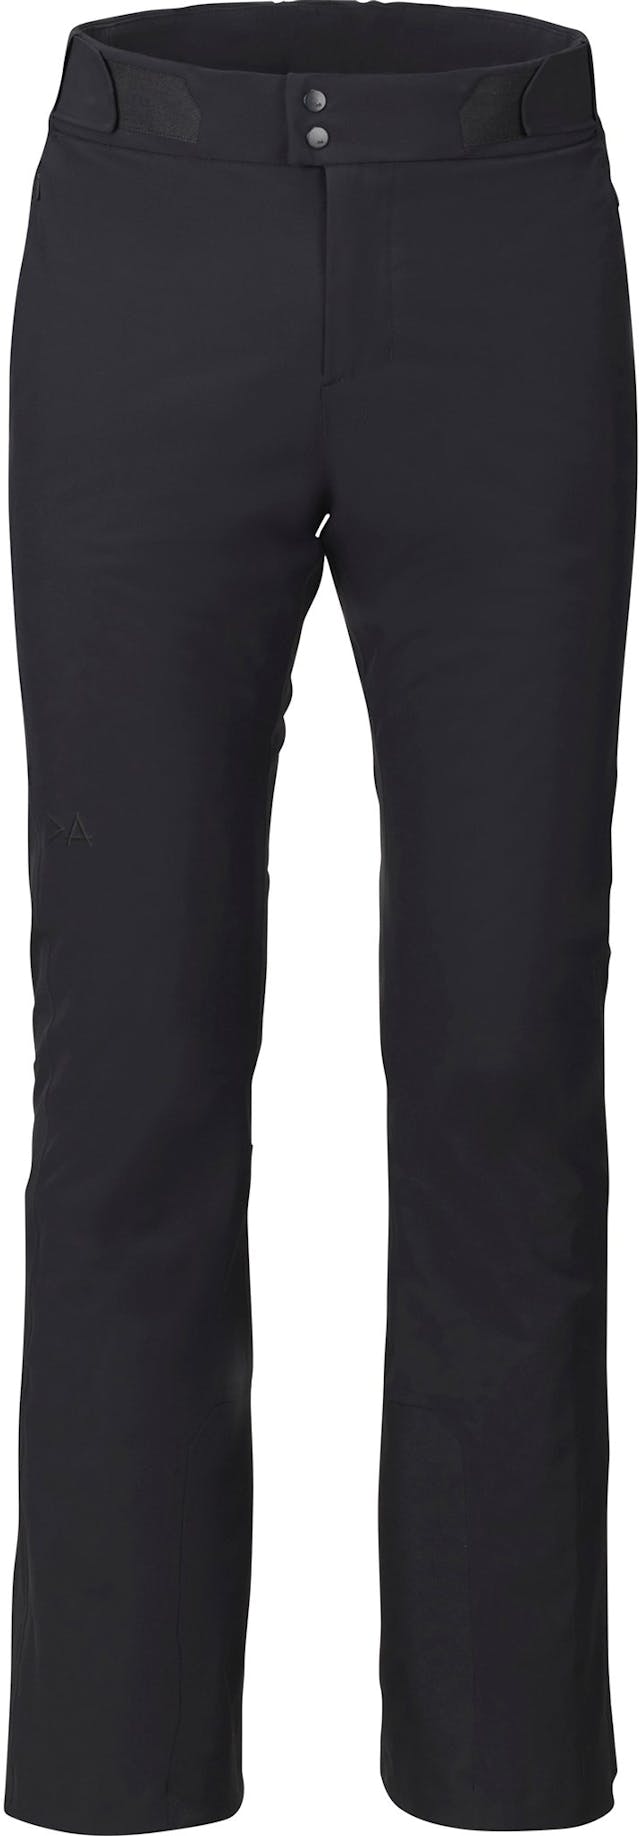 Product image for Curve Stretch Pants - Women’s